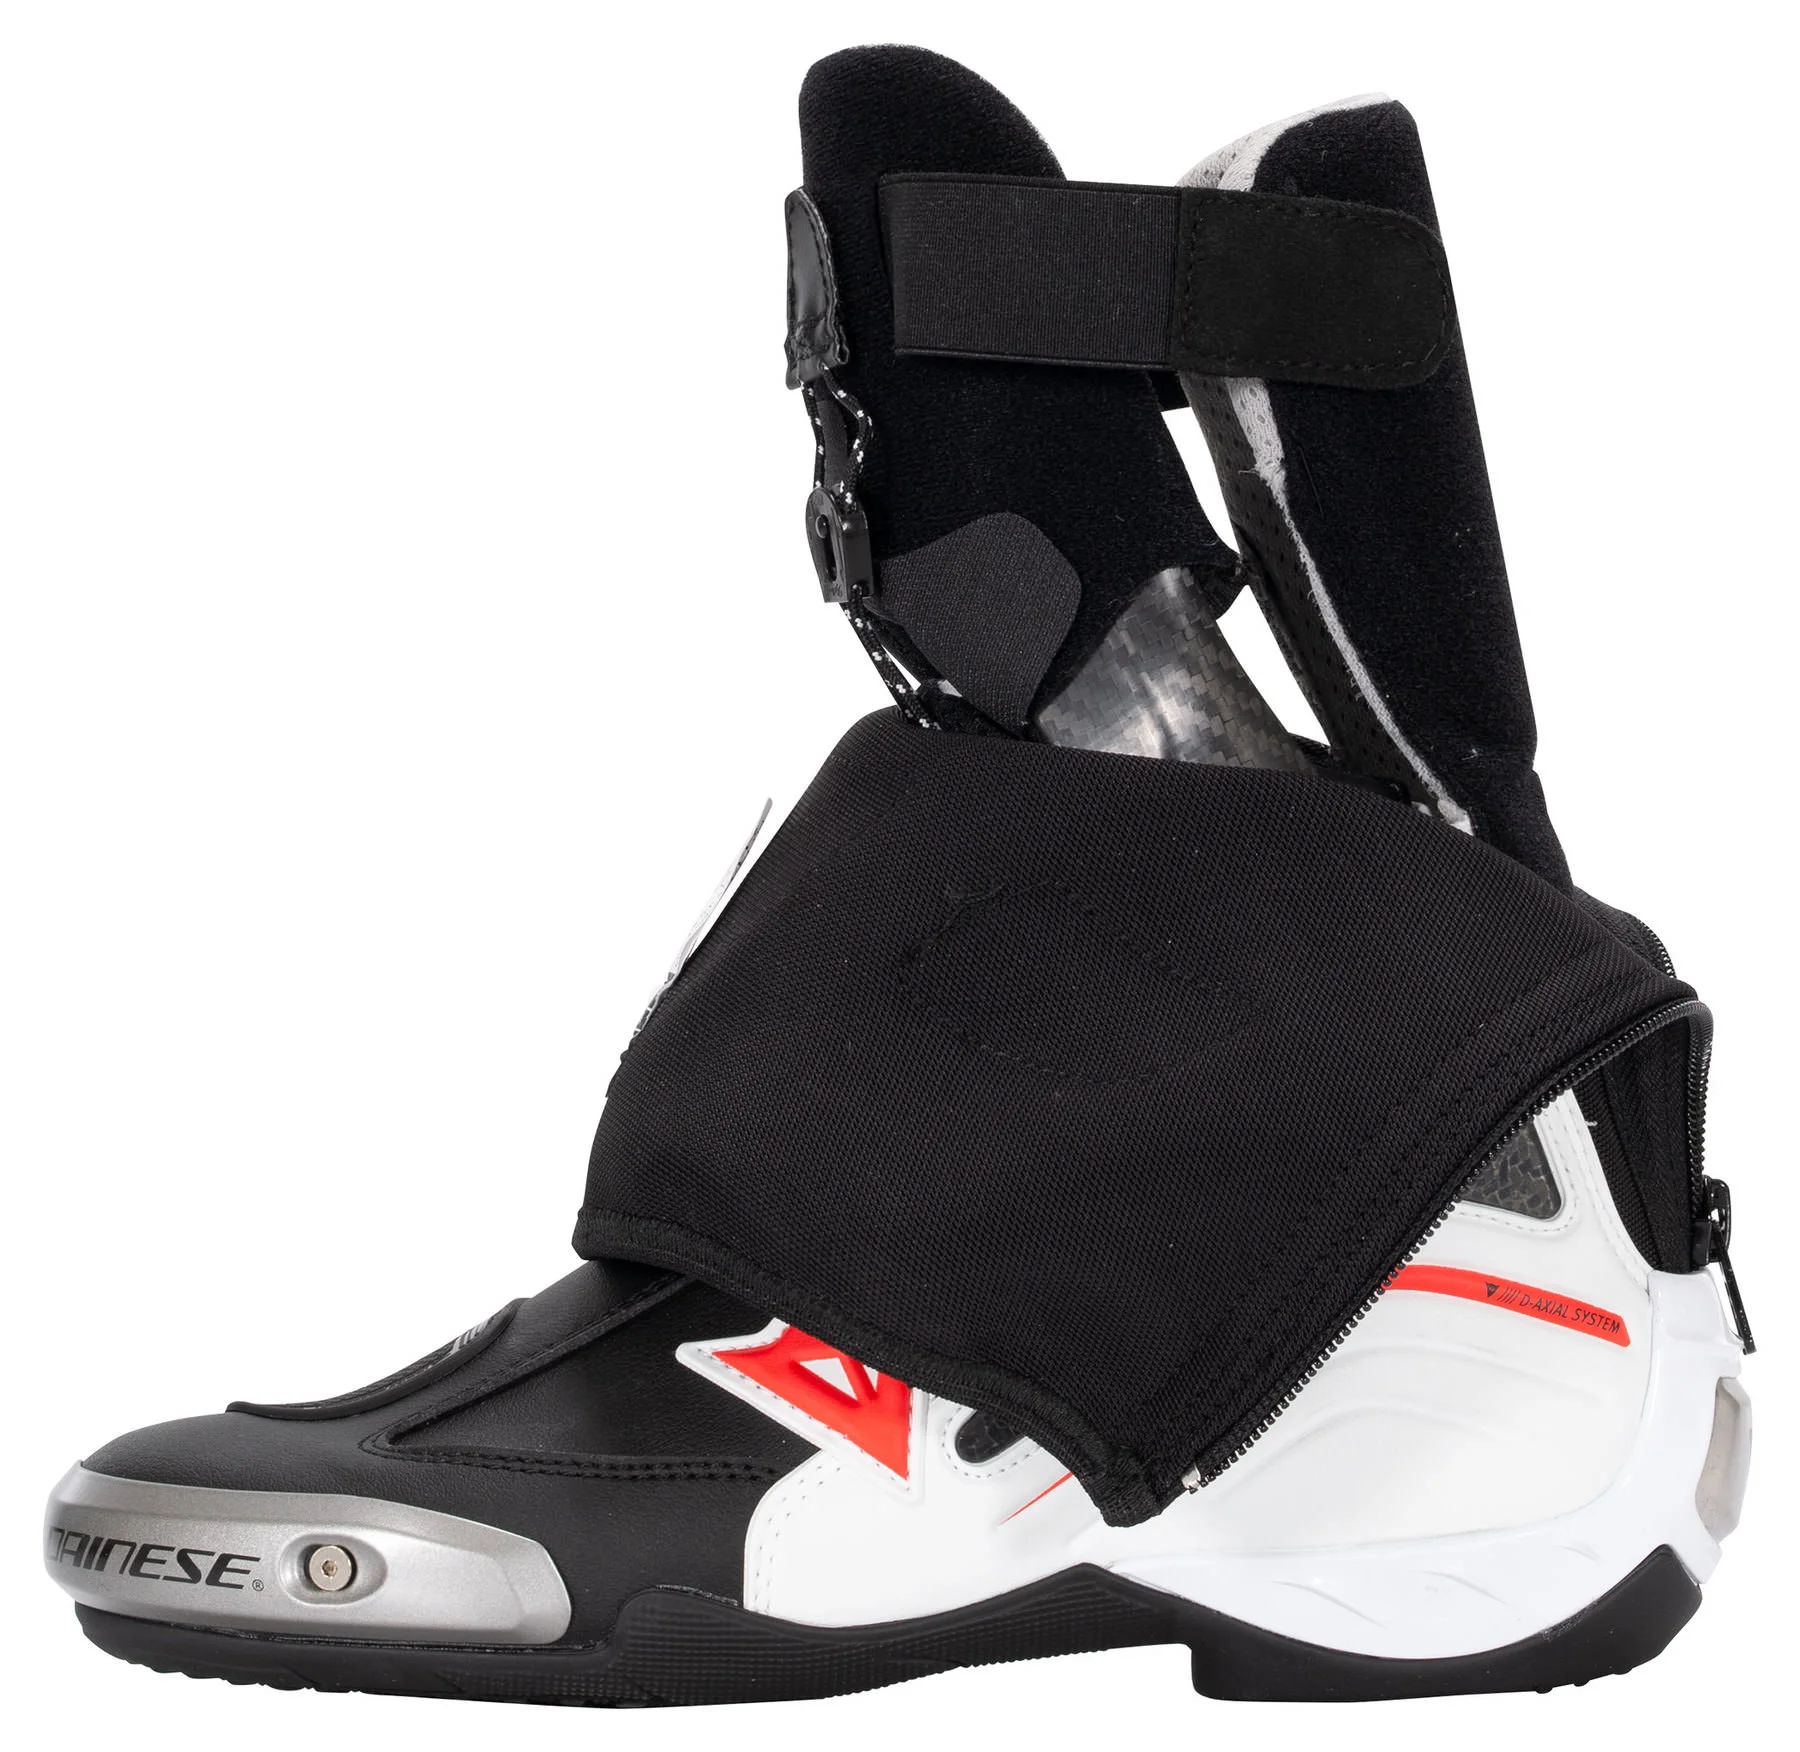 DAINESE AXIAL D1, T. 40